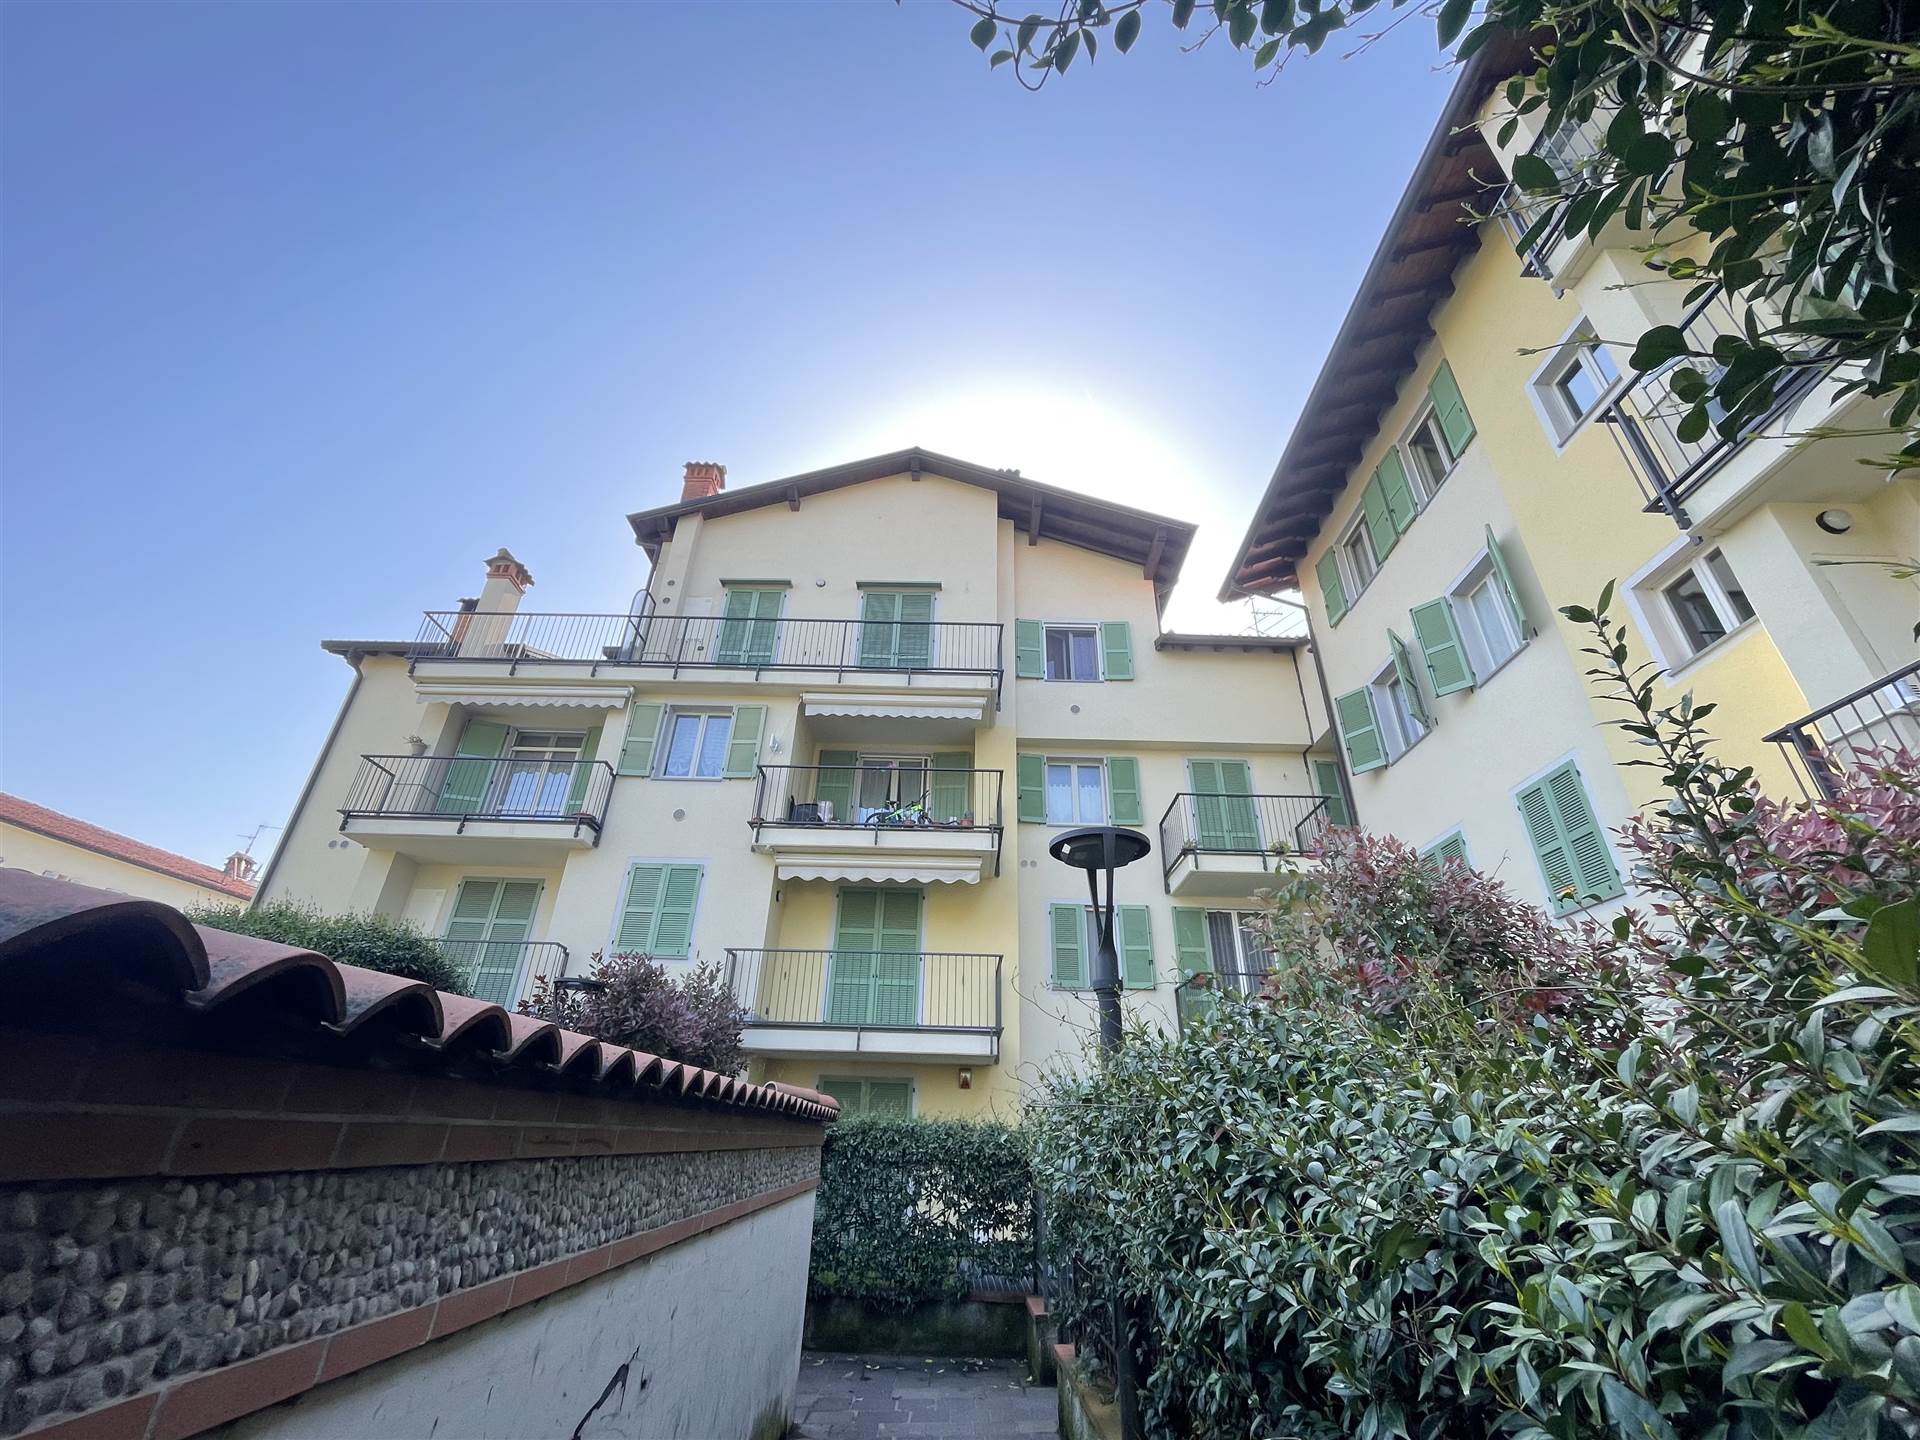 VAPRIO D'ADDA, VAPRIO D'ADDA, Apartment for sale of 55 Sq. mt., Excellent Condition, Heating Individual heating system, Energetic class: F, Epi: 208,